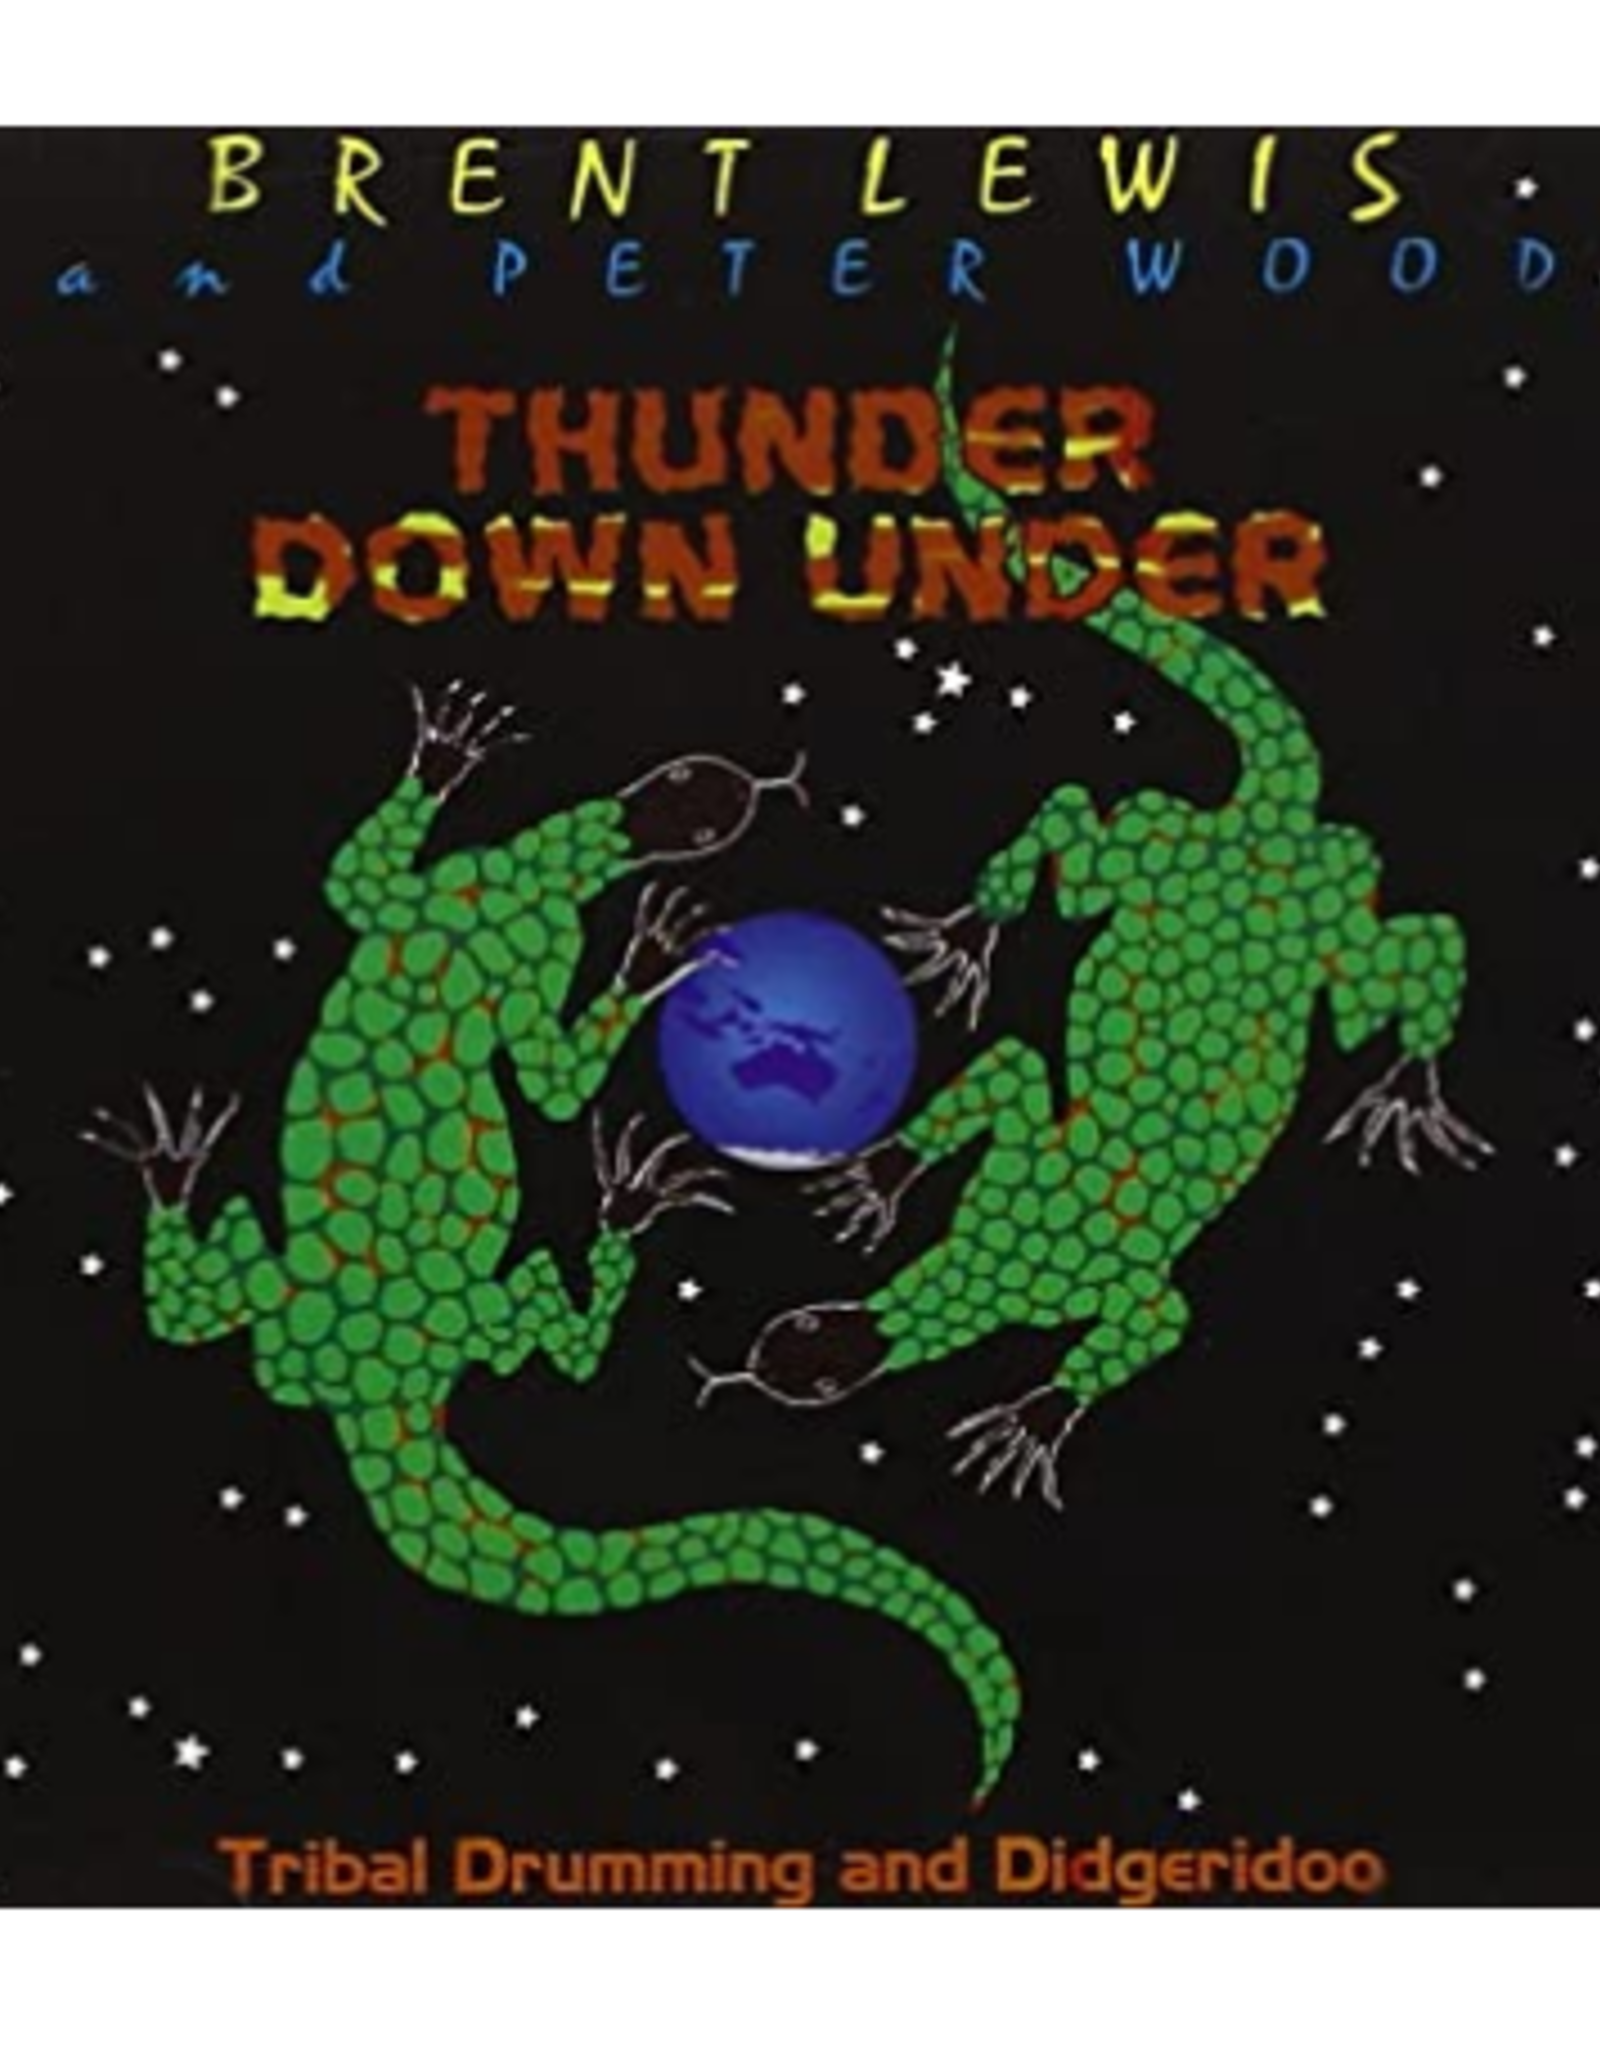 Brent Lewis Thunder Down Under CD by Brent Lewis